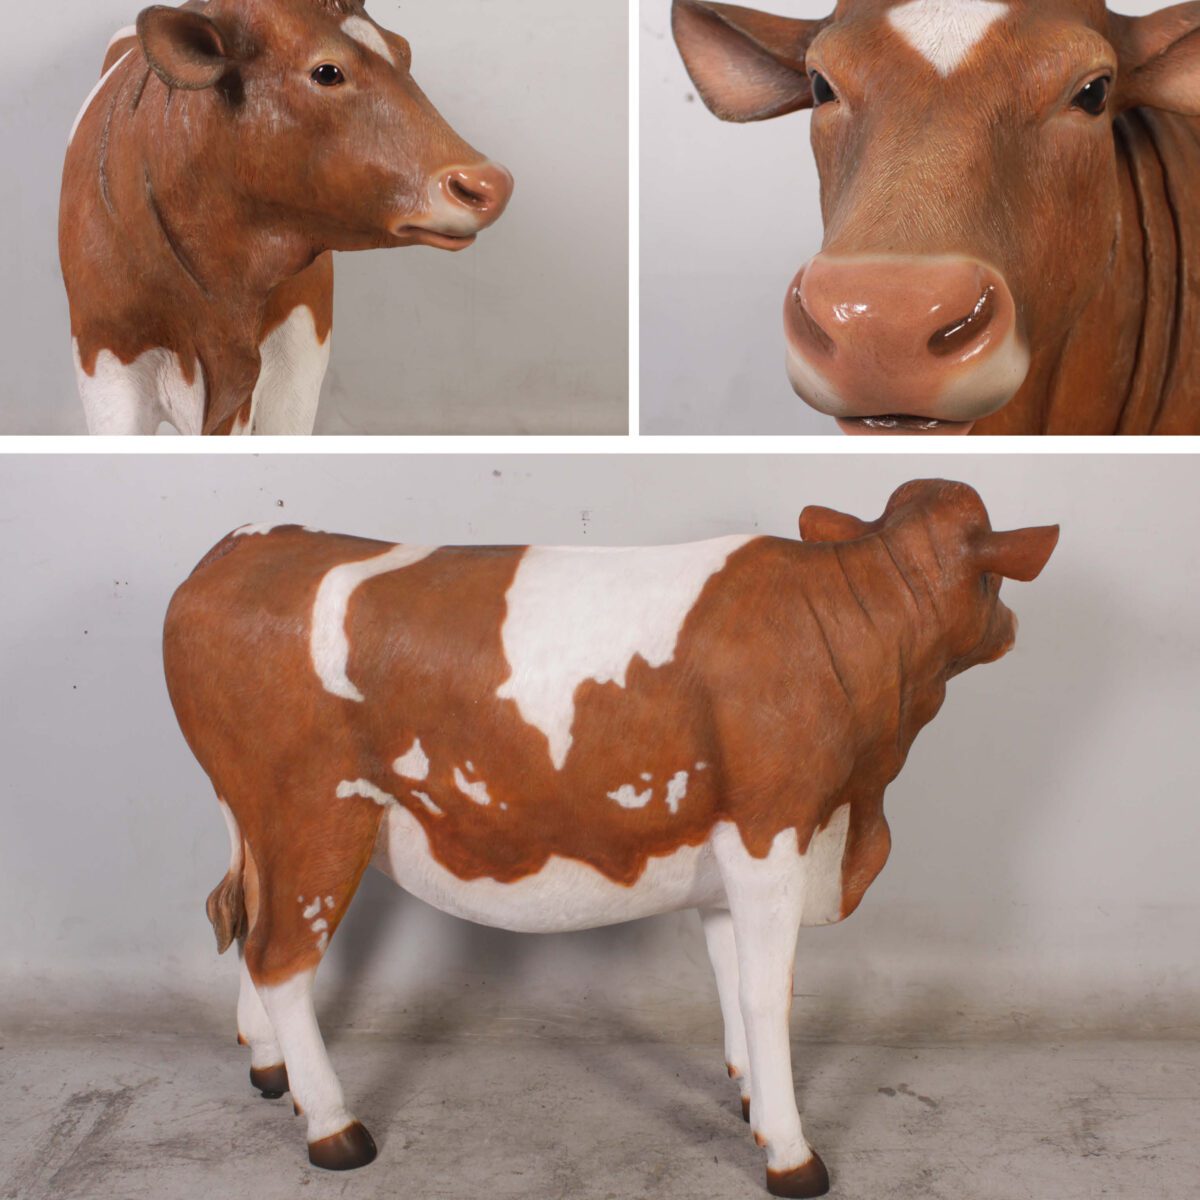 Life Size Guernsey Cow Sculptures In Australia